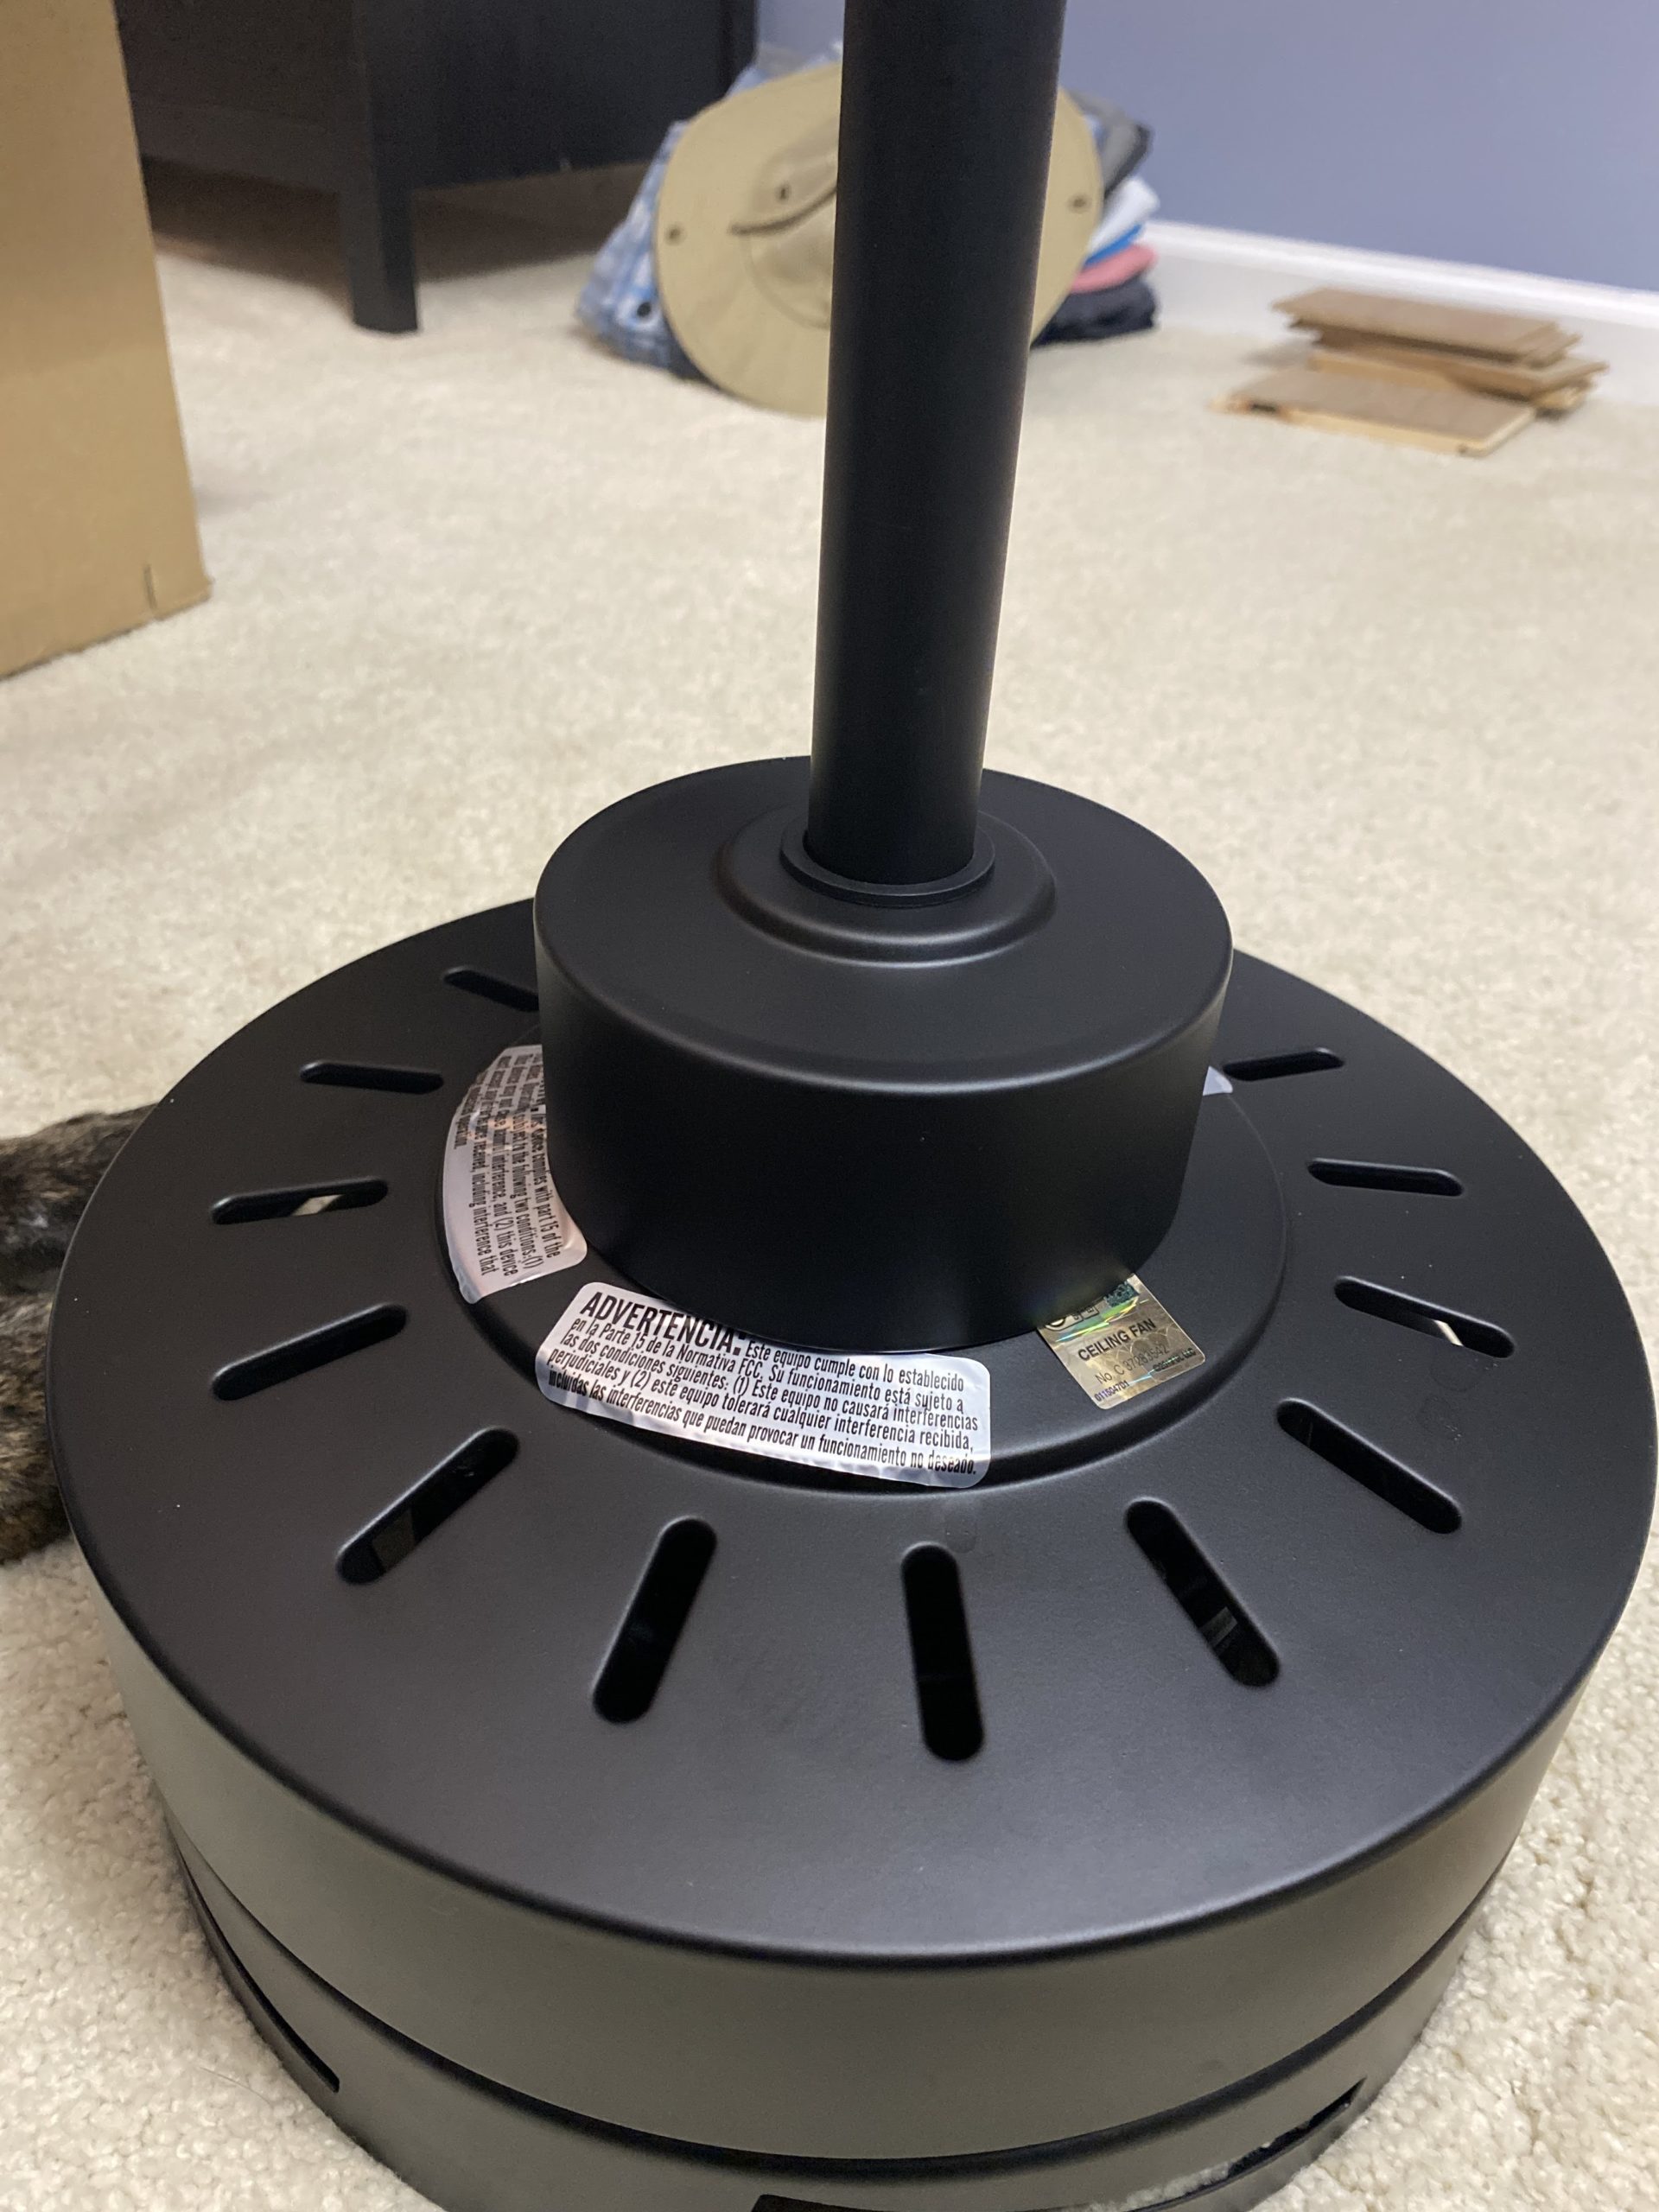 Ceiling Fan Assembly: Feed the coupling cover (covers the top of the motor) over the downrod